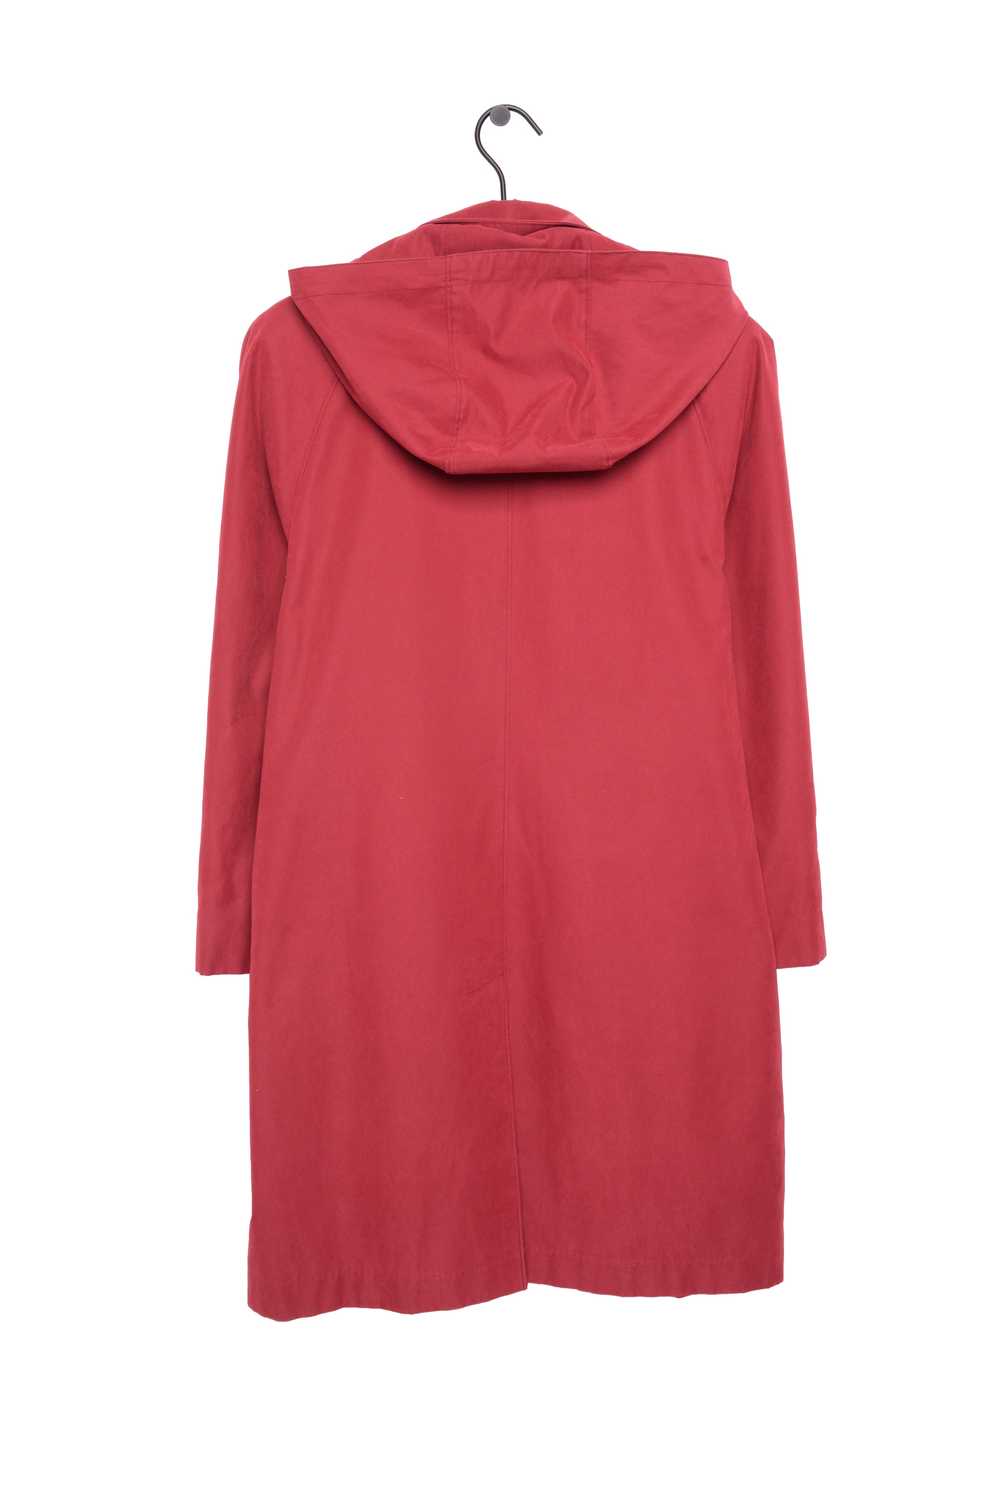 Red Hooded Trench Coat - image 2